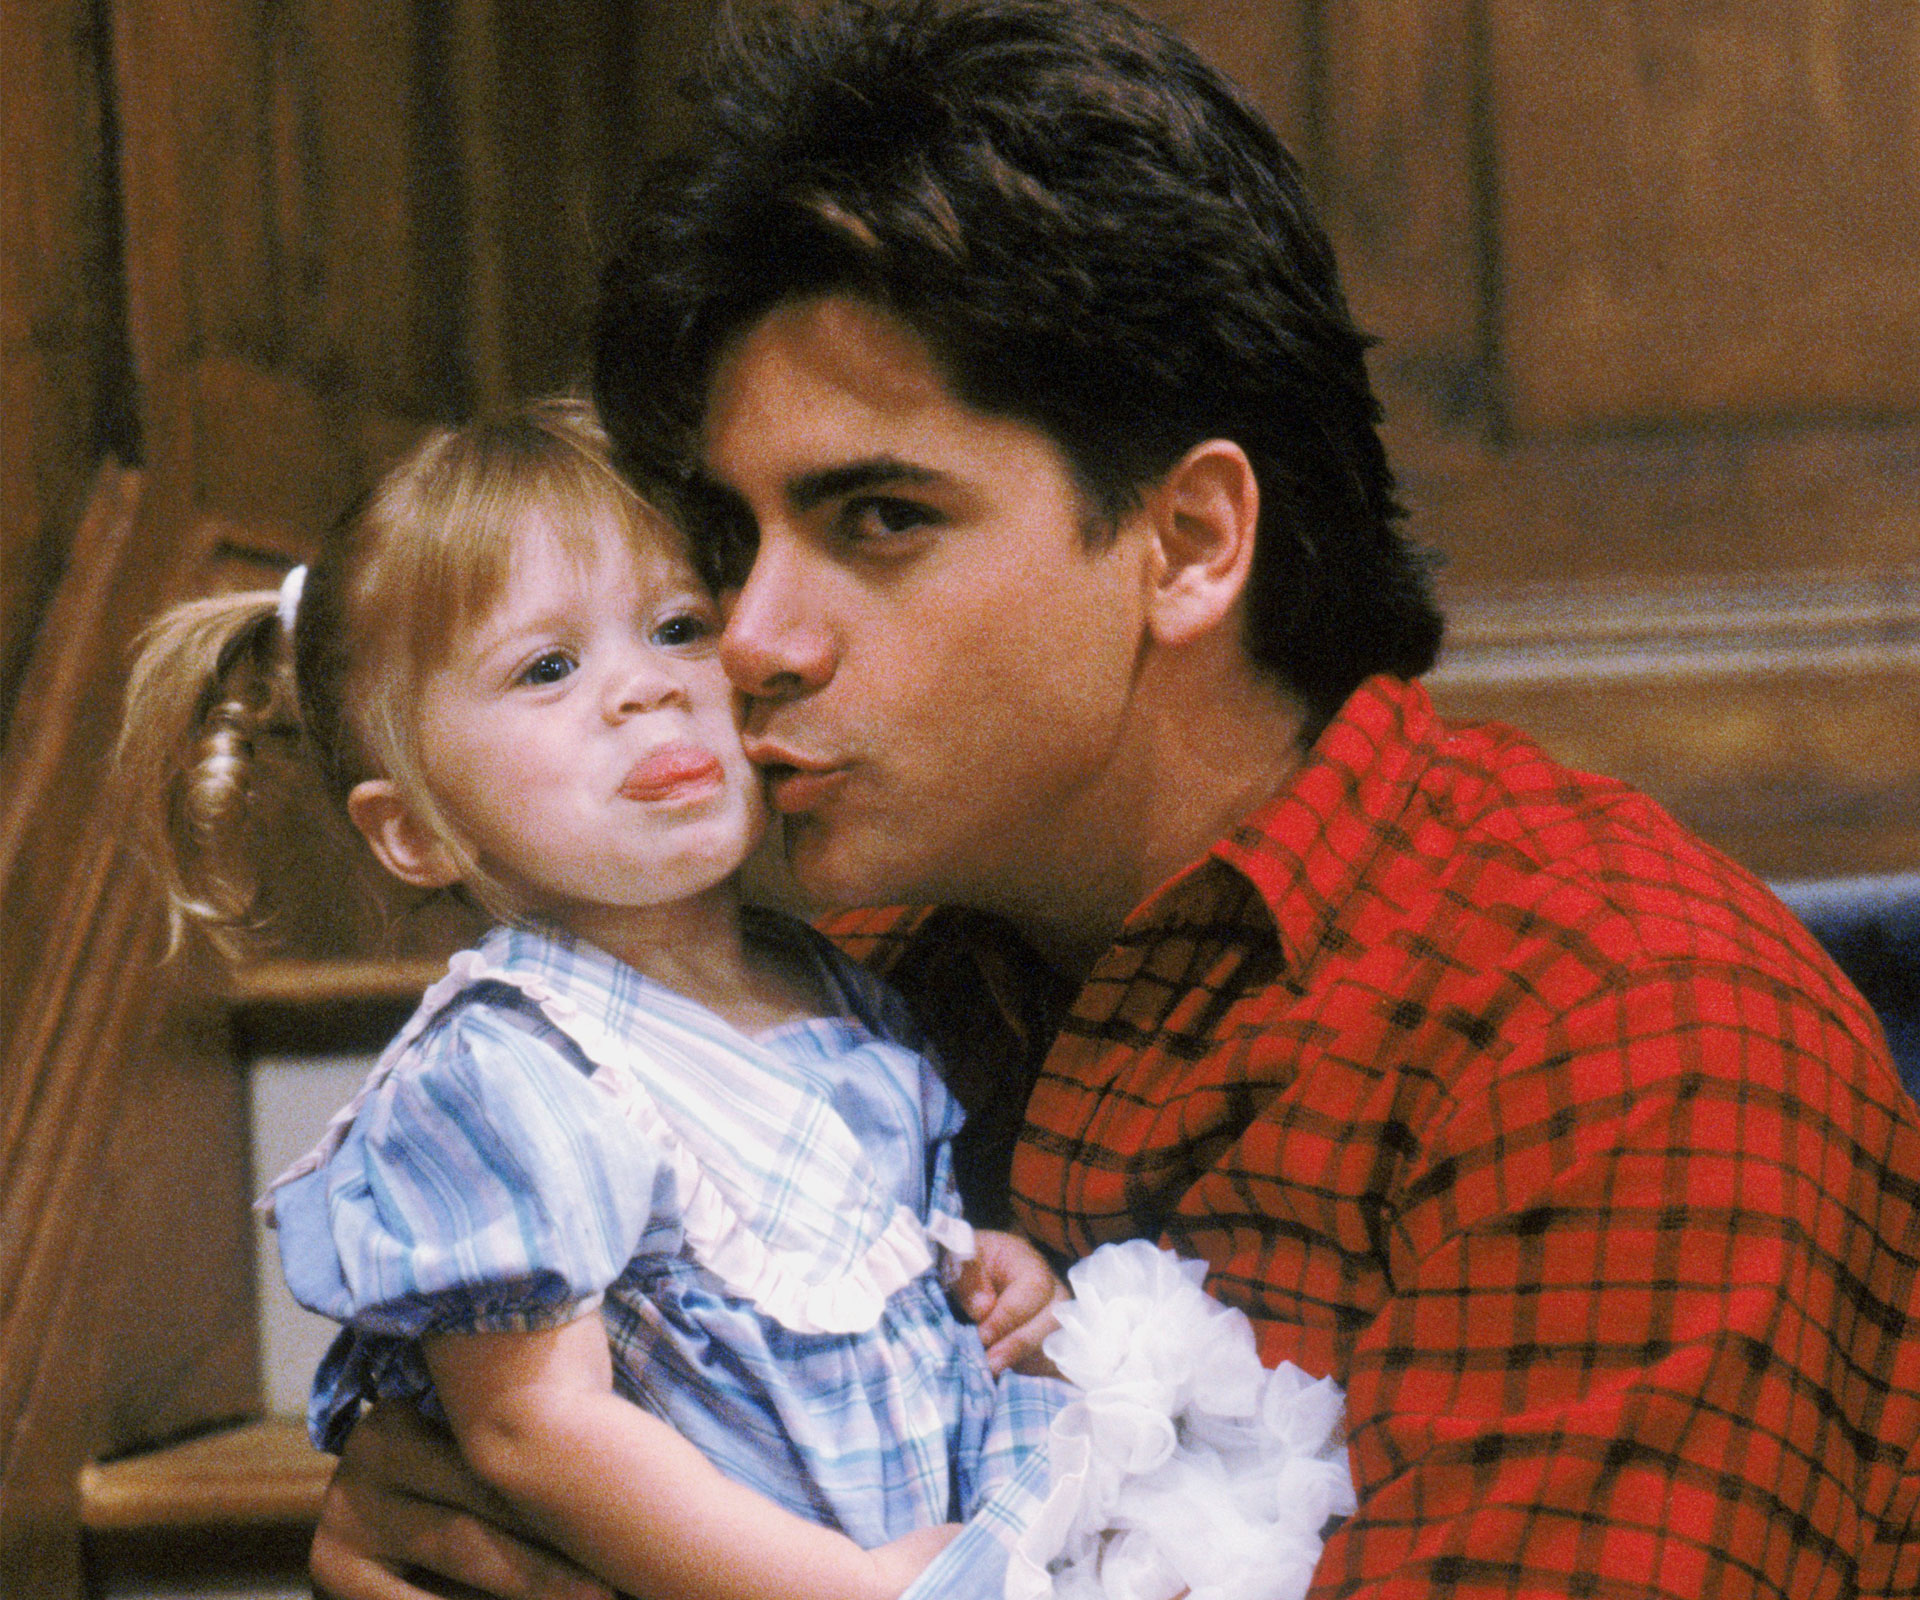 John Stamos shares adorable home video of the Olsen twins